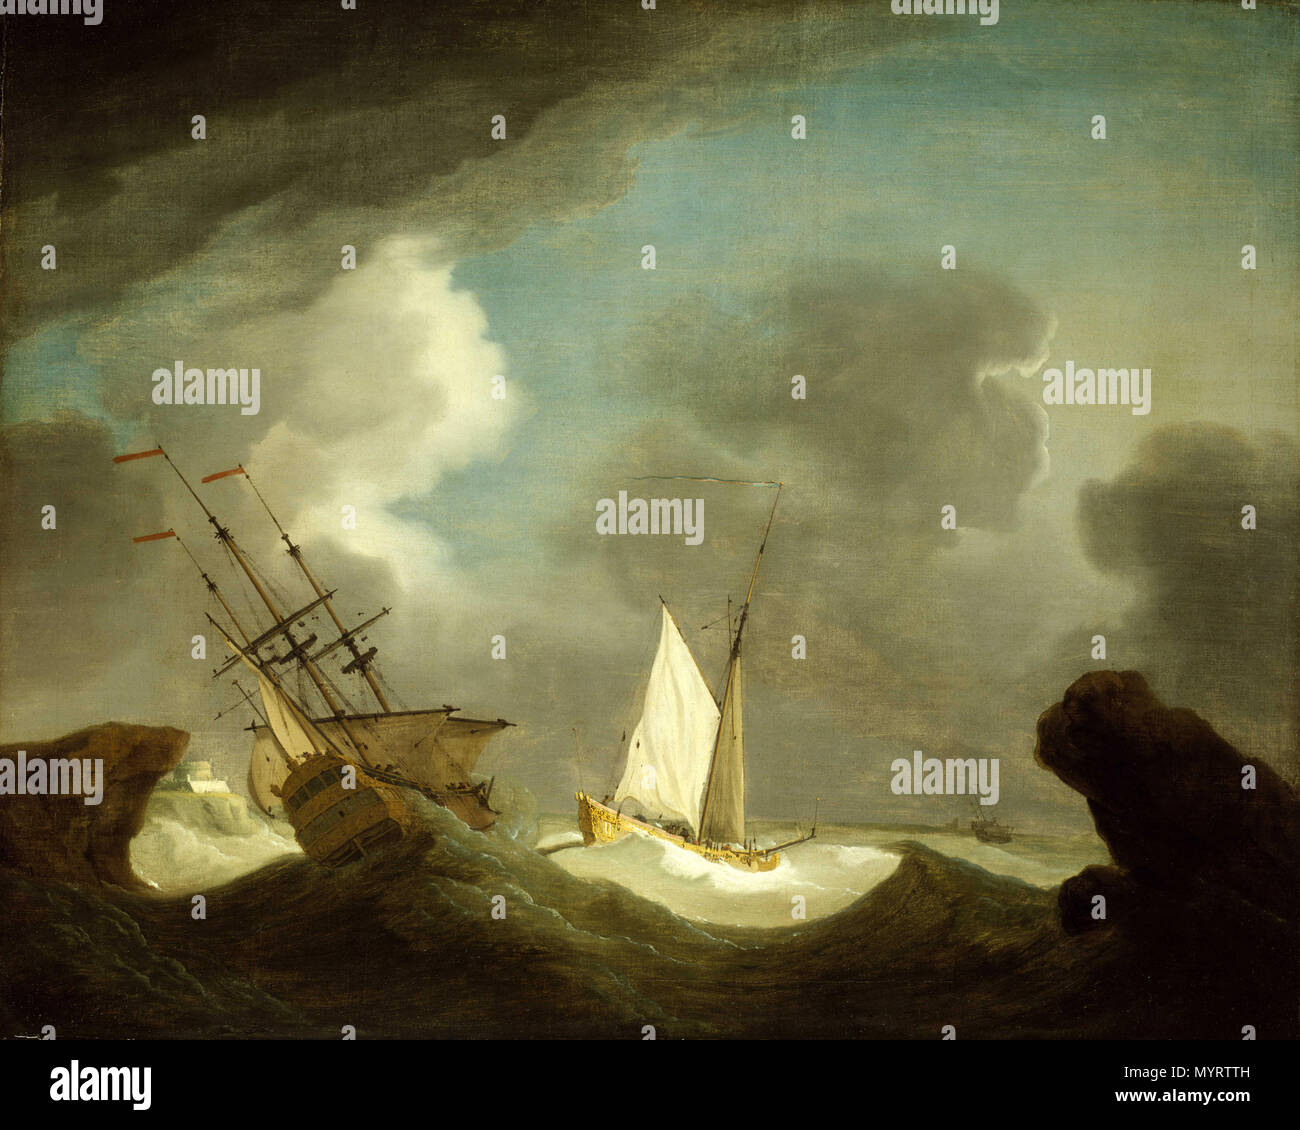 .  English: An Indiaman and a Royal Yacht in a Storm off a Rocky Coast with a Castle An interpretation of a storm scene depicting a ship of the Honourable East India Company and a gaff-rigged royal yacht. They are being tossed in a stormy sea, under a lowering sky to the left. The Indiaman is depicted pitched at an angle, stern visible and slightly to starboard, with its sails lowered and rocks close by on the left. Land and a fortification is visible in the distance to the left, possibly one of the Channel Islands, Monamy's family home. The darkness of the sea in the foreground is relieved by Stock Photo